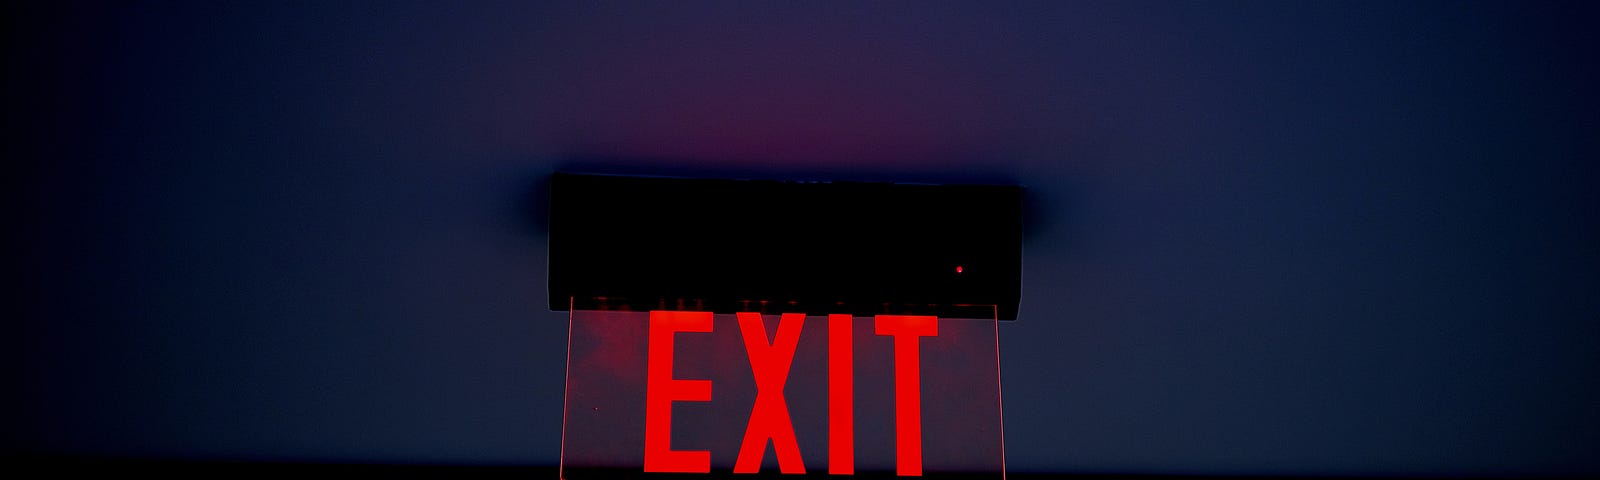 The exit sign in a cafe